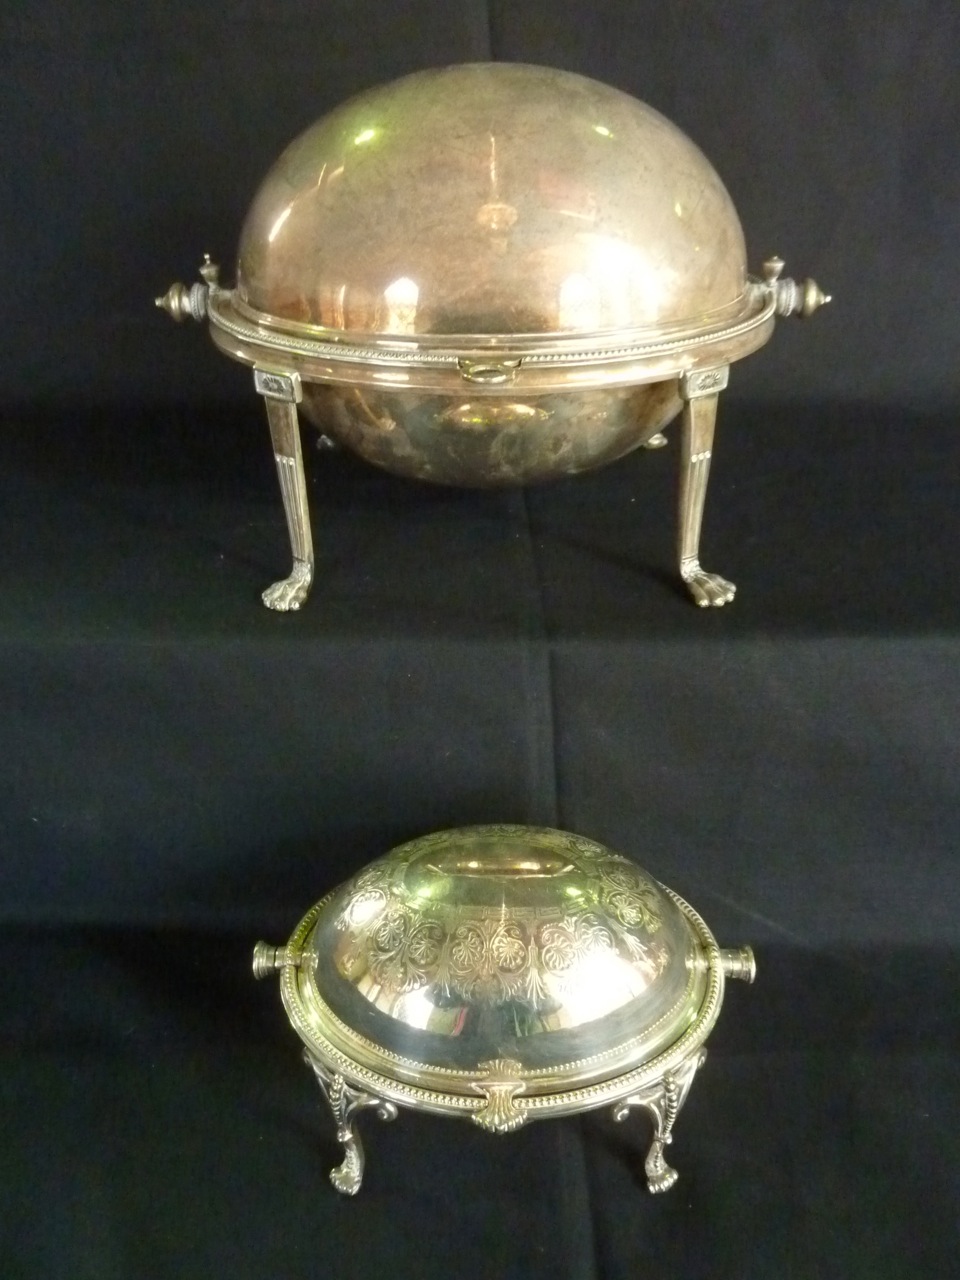 A 19th century EPNS revolving breakfast warmer and butter dish with beaded borders and paw feet